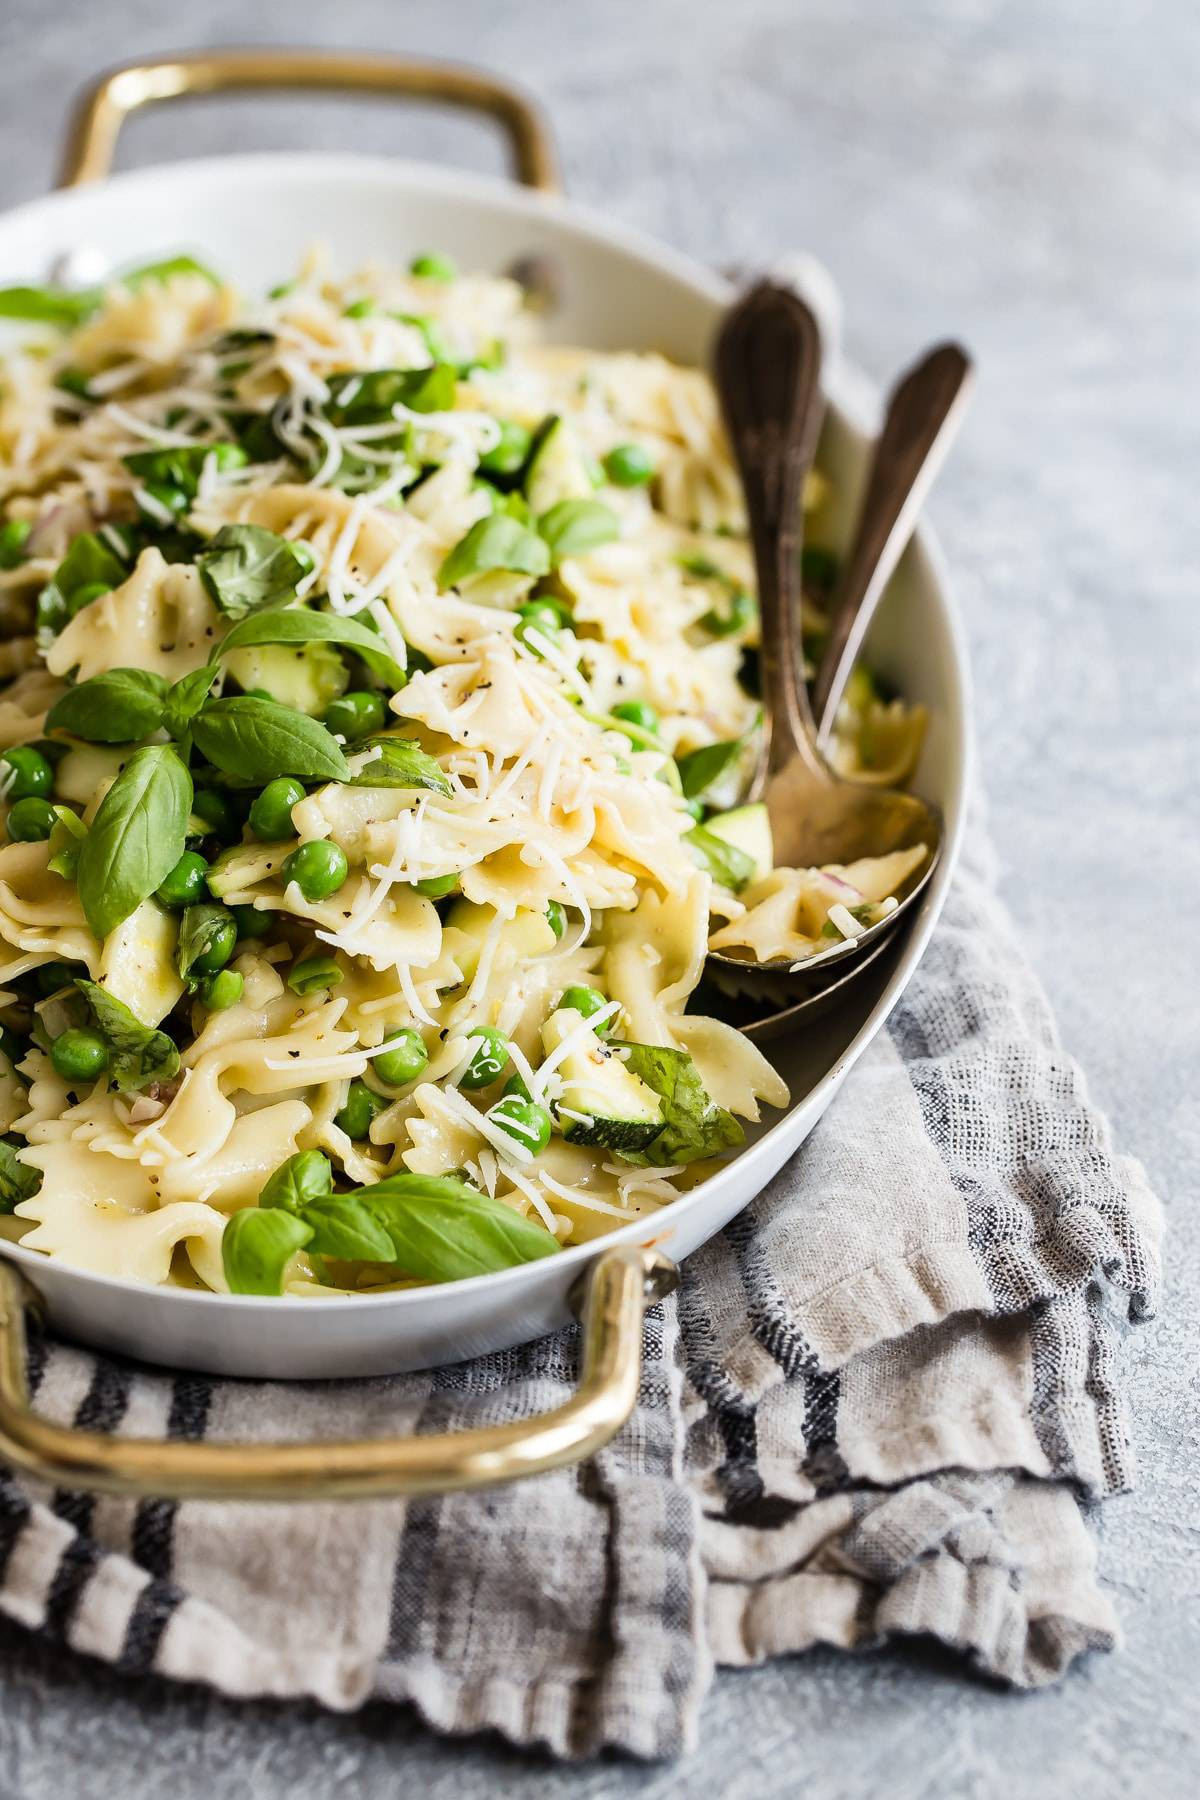 Bowtie Pasta Salad with Peas Lovely Bowtie Pasta Salad with Peas Lemon and Basil